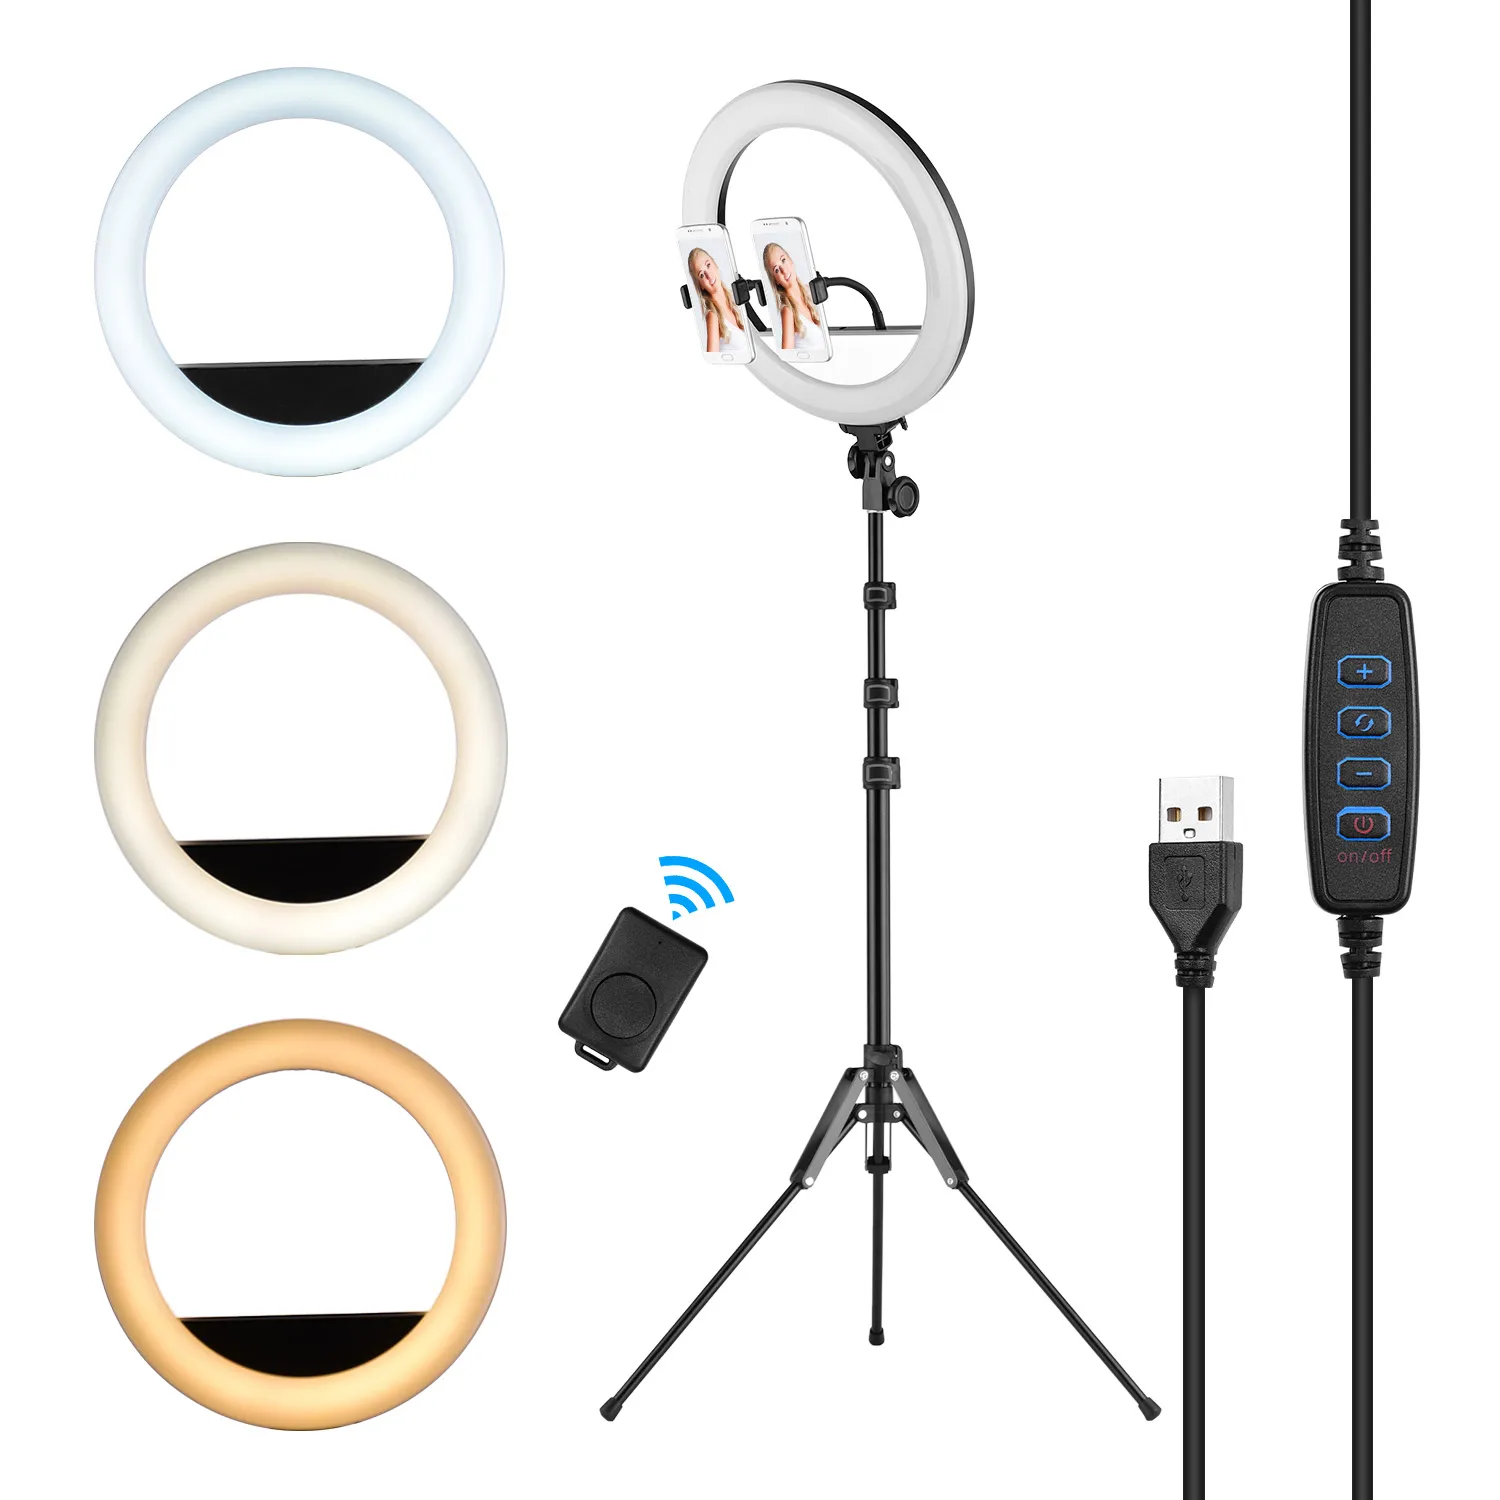 

14inch Video LED Ring Light 13W 3000-6500K 3 Colors Dimmable CRI90 with Aluminum Alloy Tripod Dual Phone Holders Remote Shutter